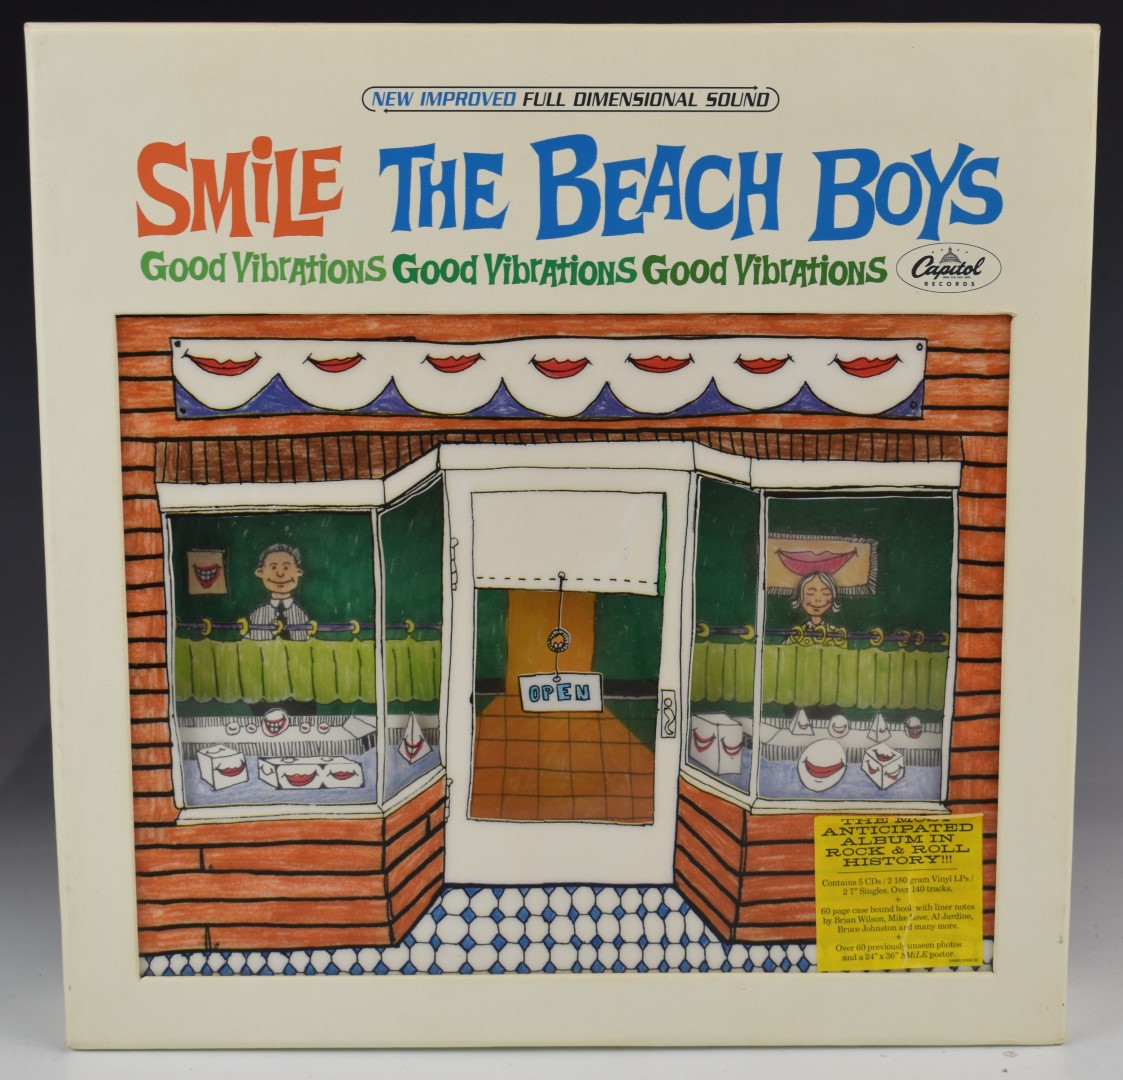 The Beach Boys - The Smile Sessions (5099902765822) box set includes two LP album, two 7inch